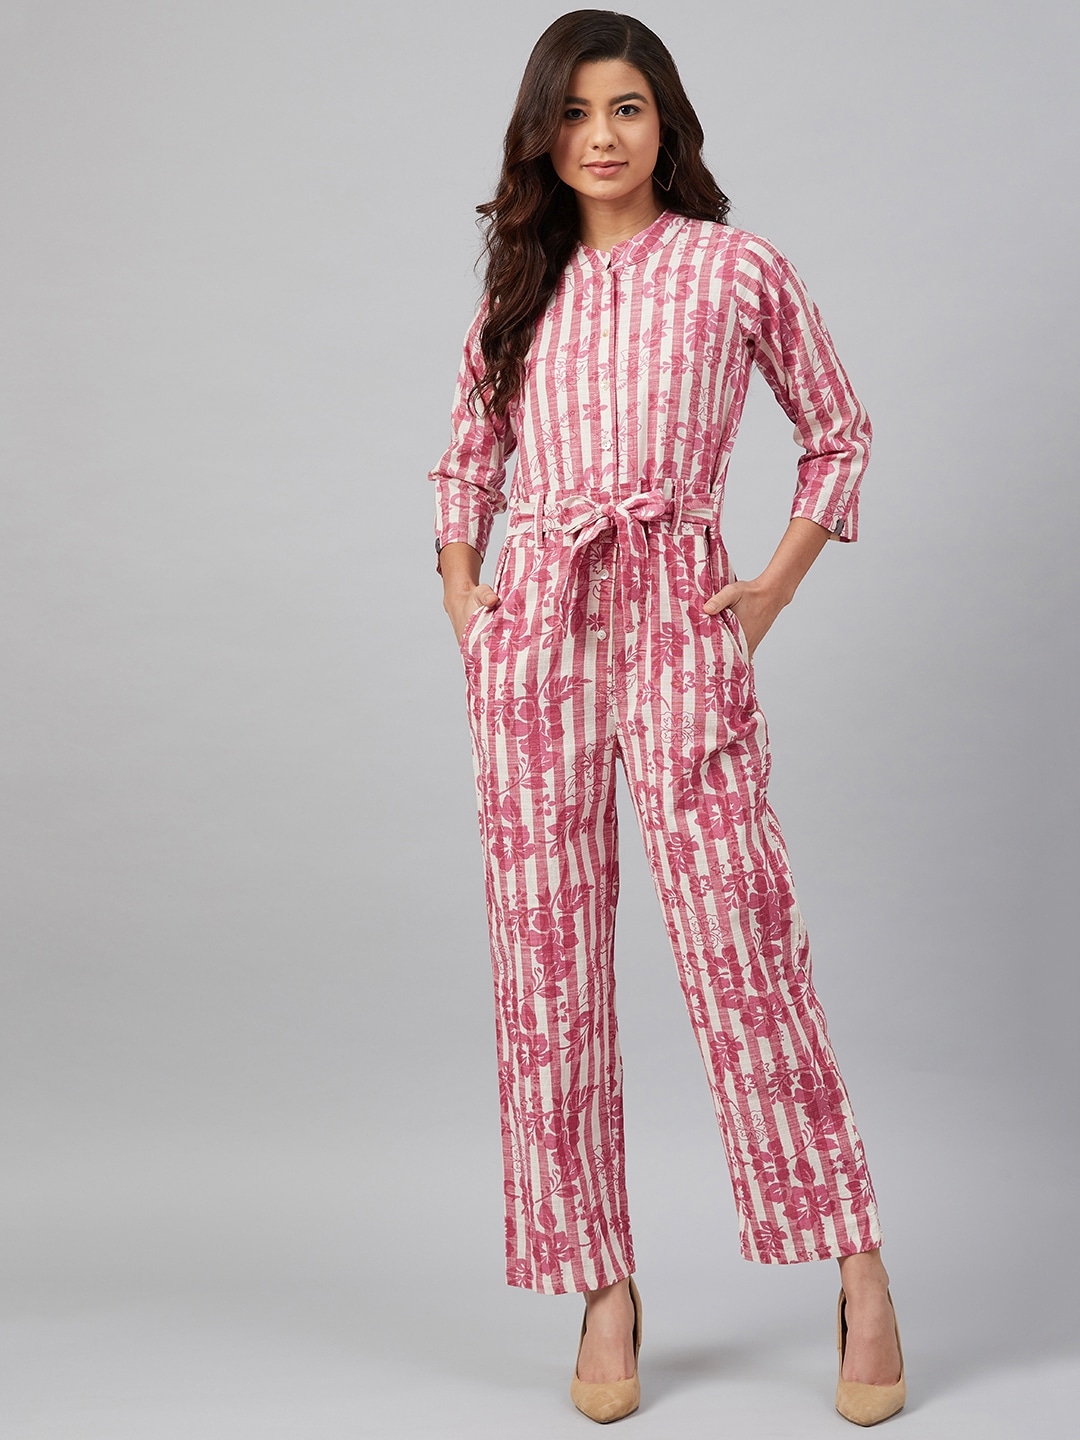 Jompers Women Off-White & Pink Striped Mandarin Collar Basic Jumpsuit Price in India